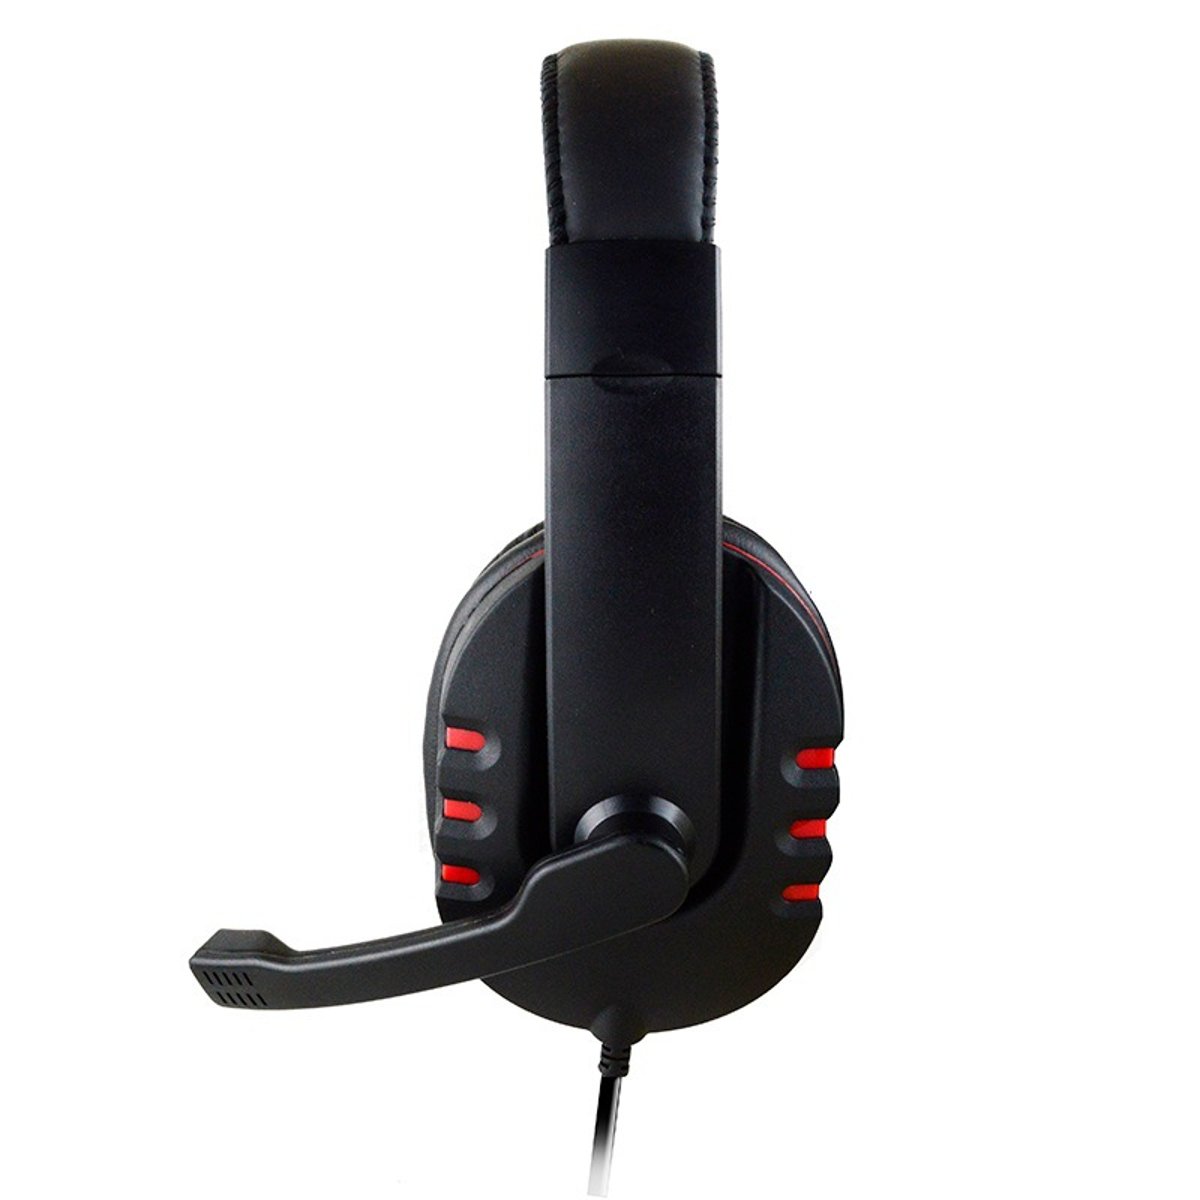 Portable-Gaming-Headset-35mm-Stereo-Surround-Gamer-Wired-Headphone-With-Mic-for-PC-Computer-PS4-Xbox-1699413-7